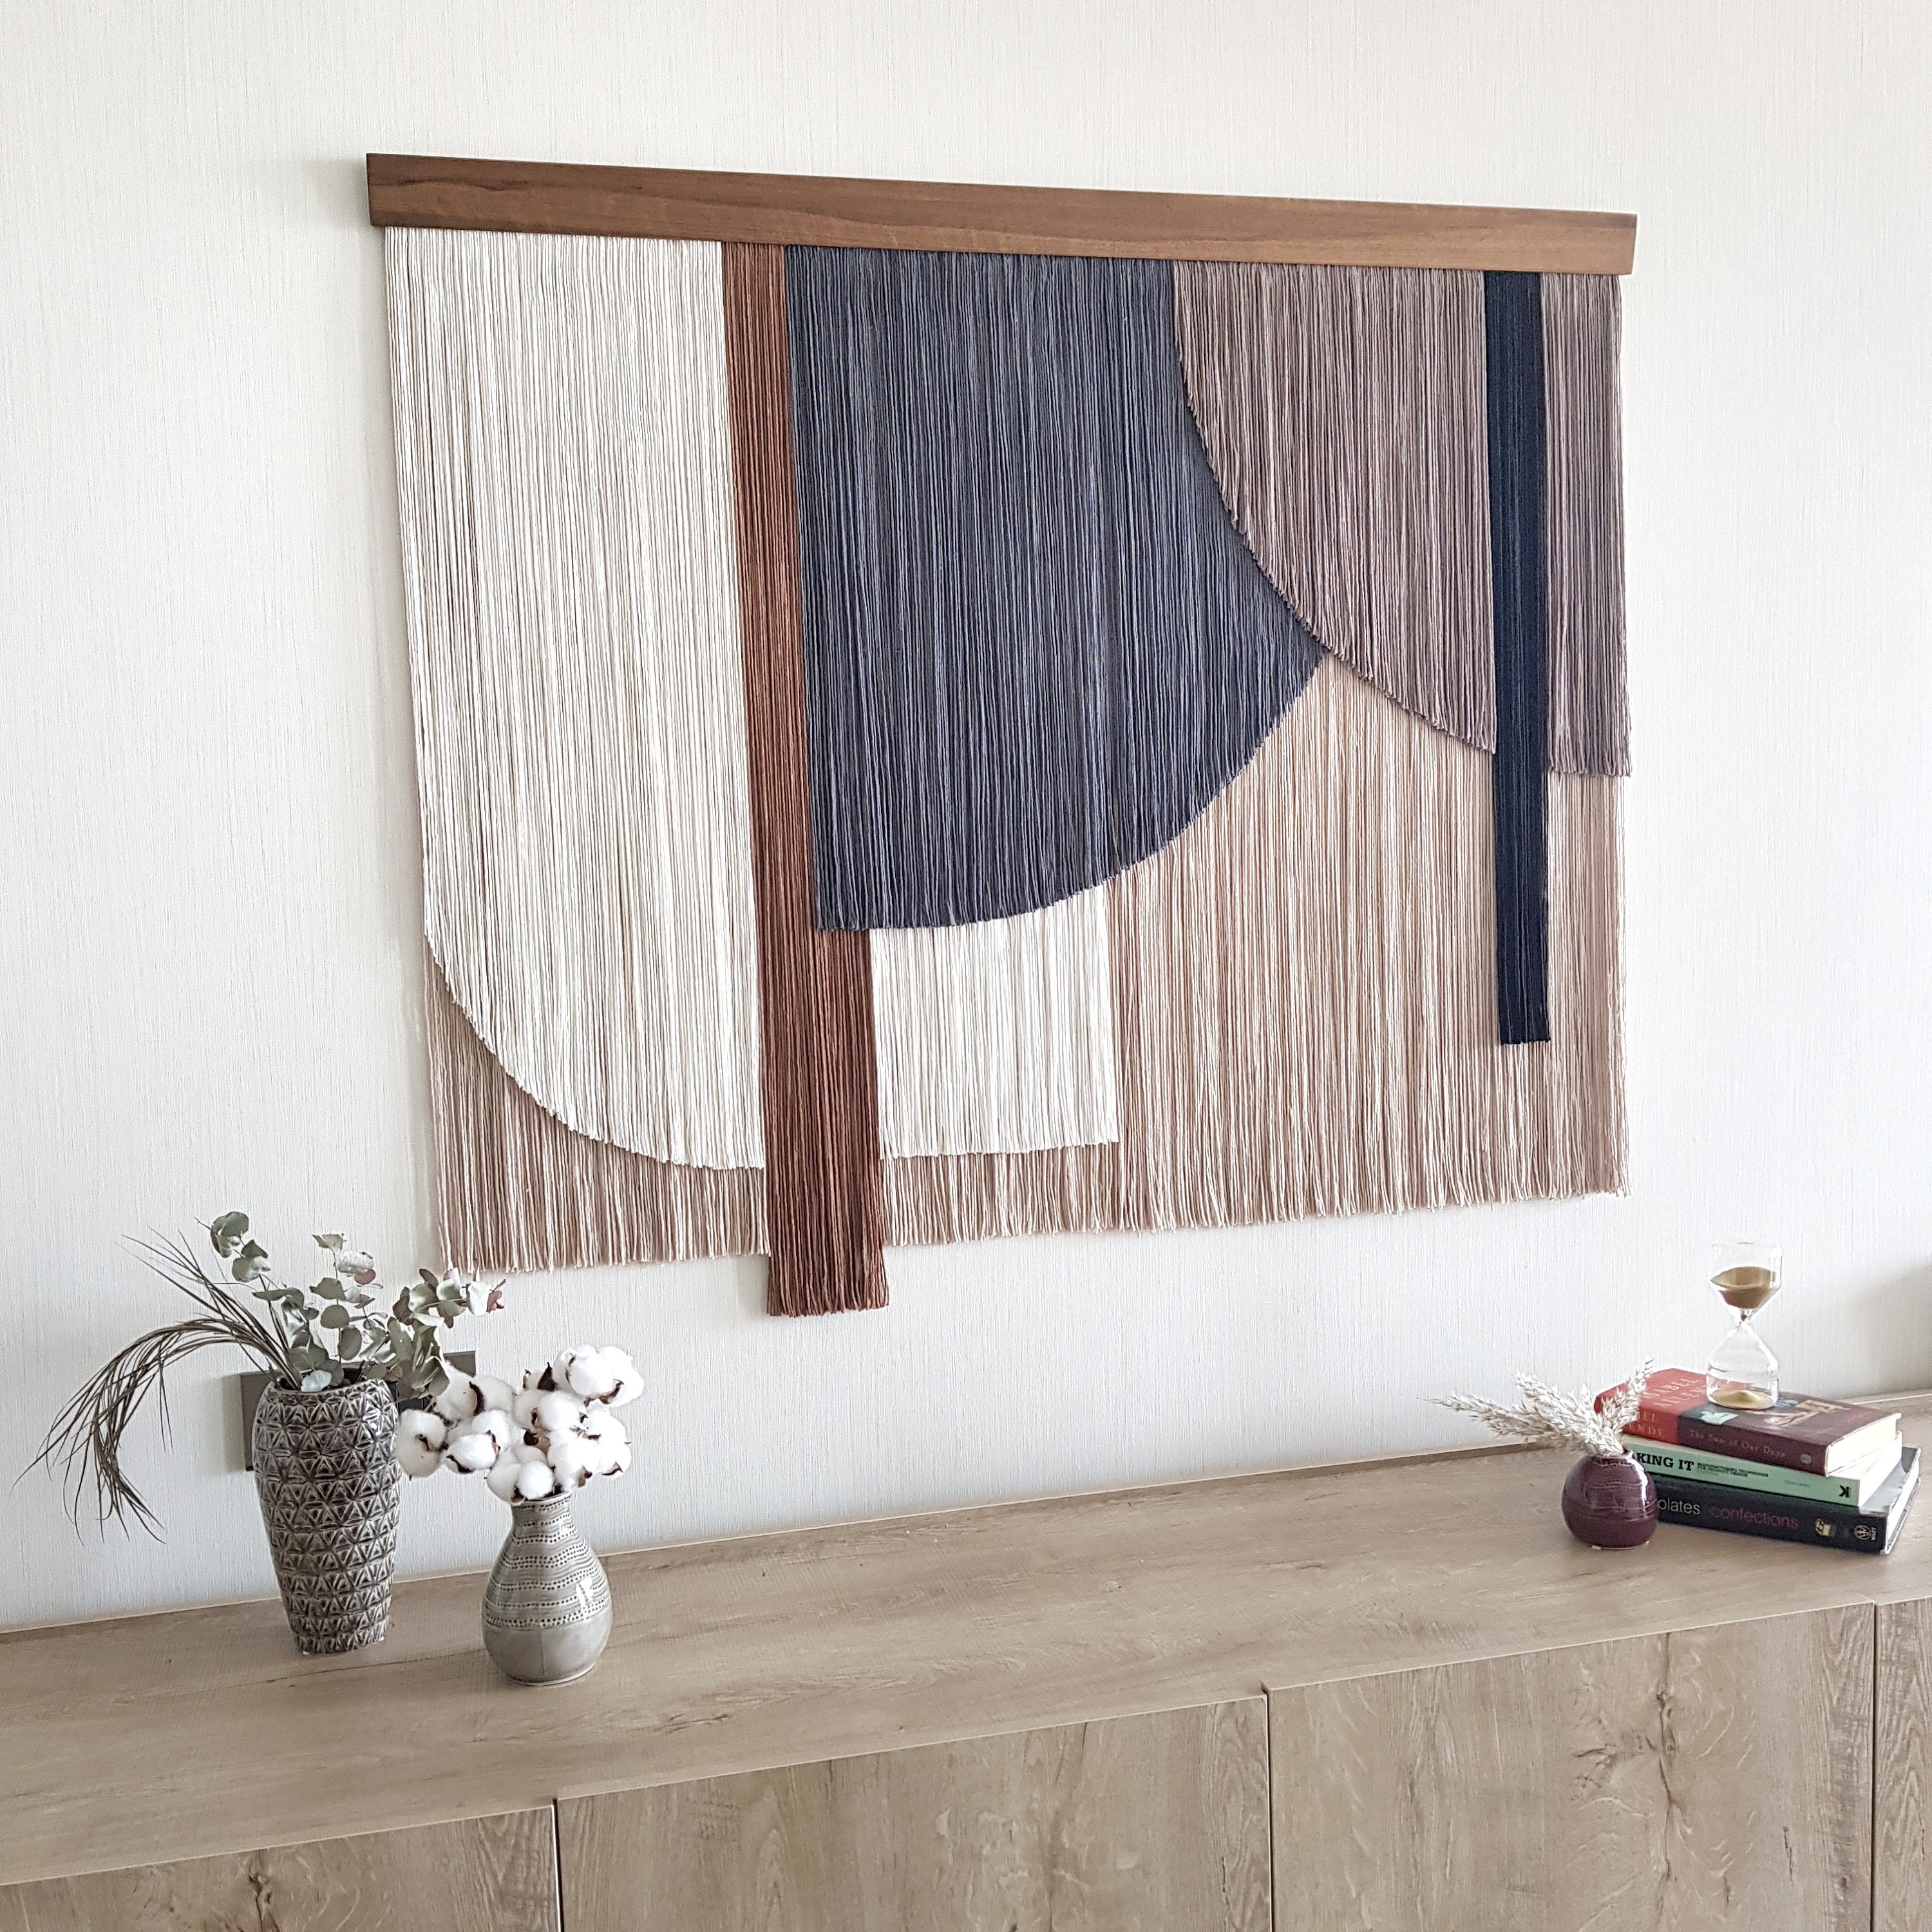 Large dip dyed fiber art wall hanging. by The Cotton Yarn